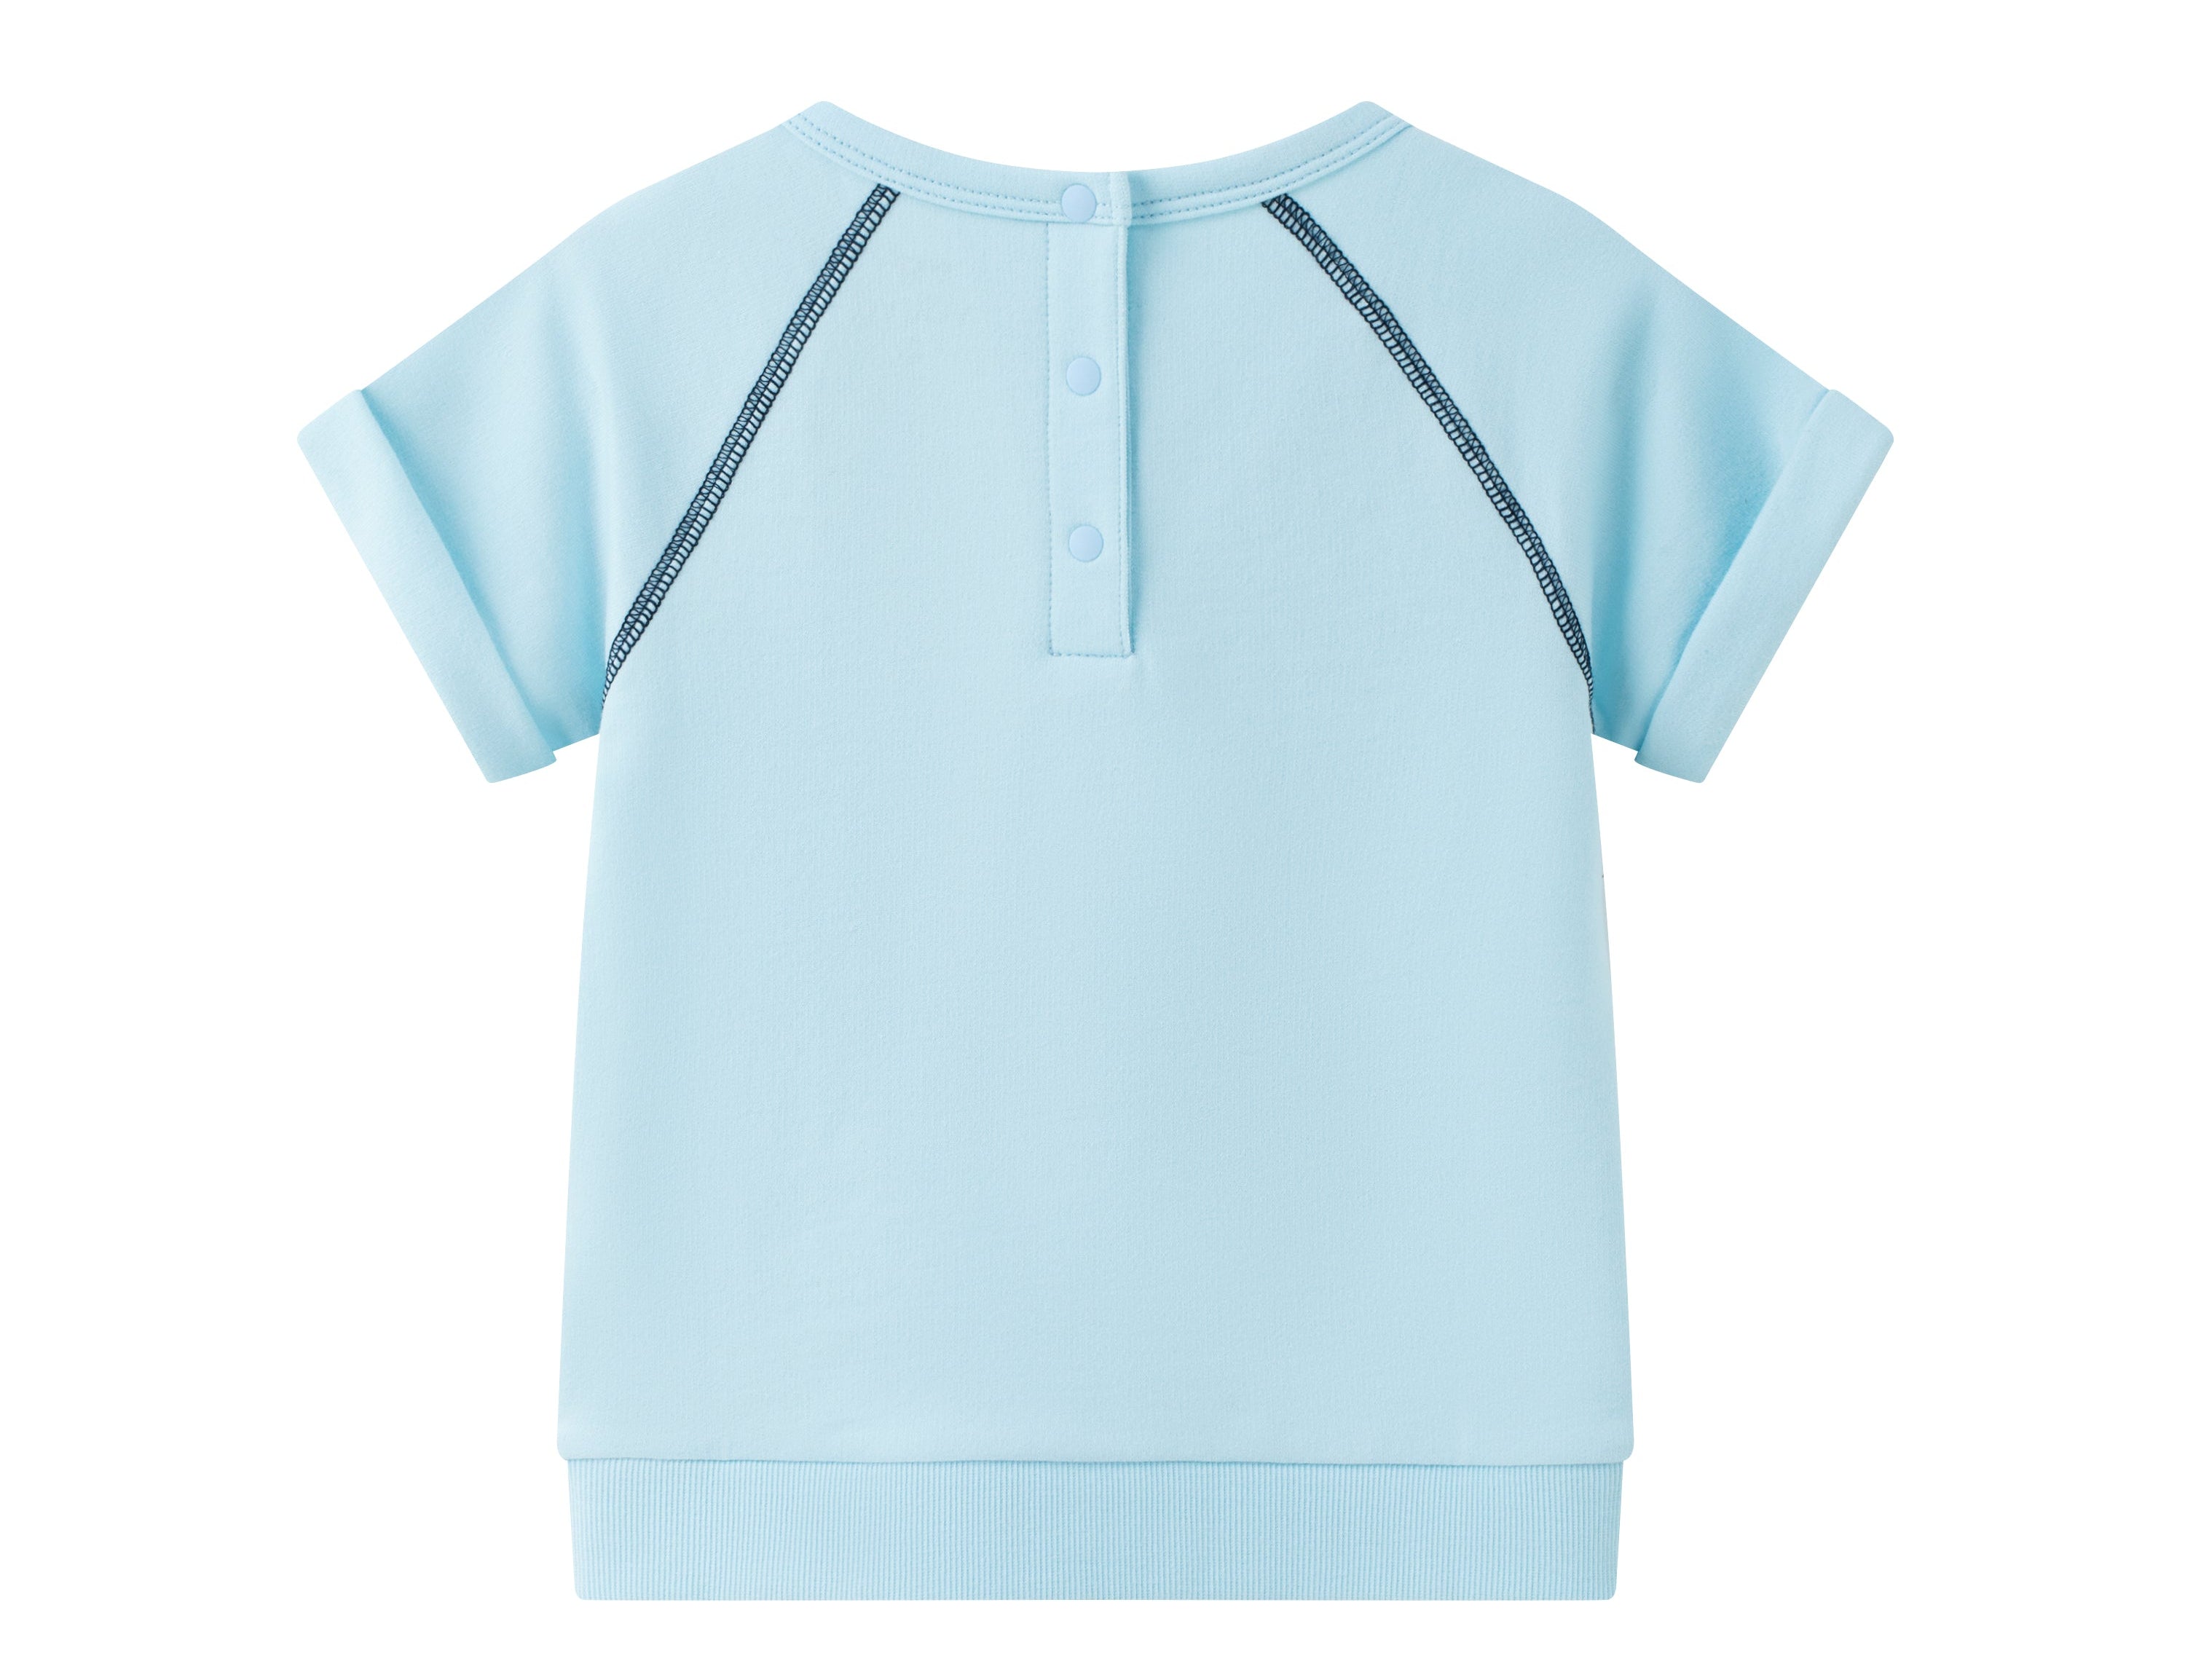 Vauva SS24 - Baby Boy Sweet Dream Short Sleeves Top (Blue) - Product 2